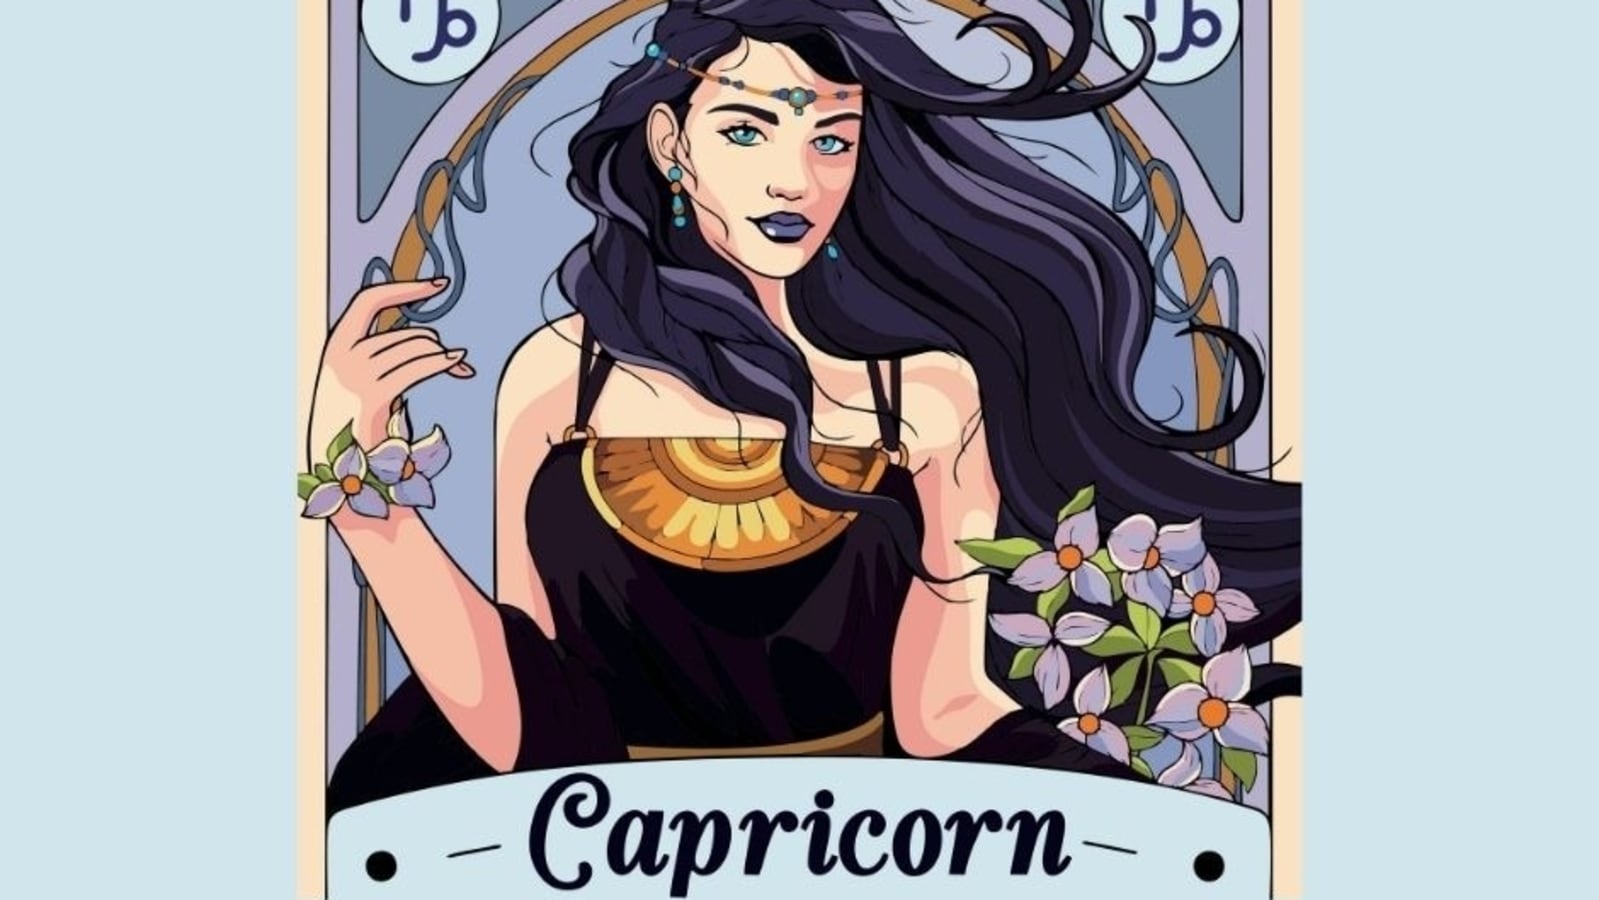 Capricorn Horoscope Today: Daily predictions for June 28, '22 states, successful